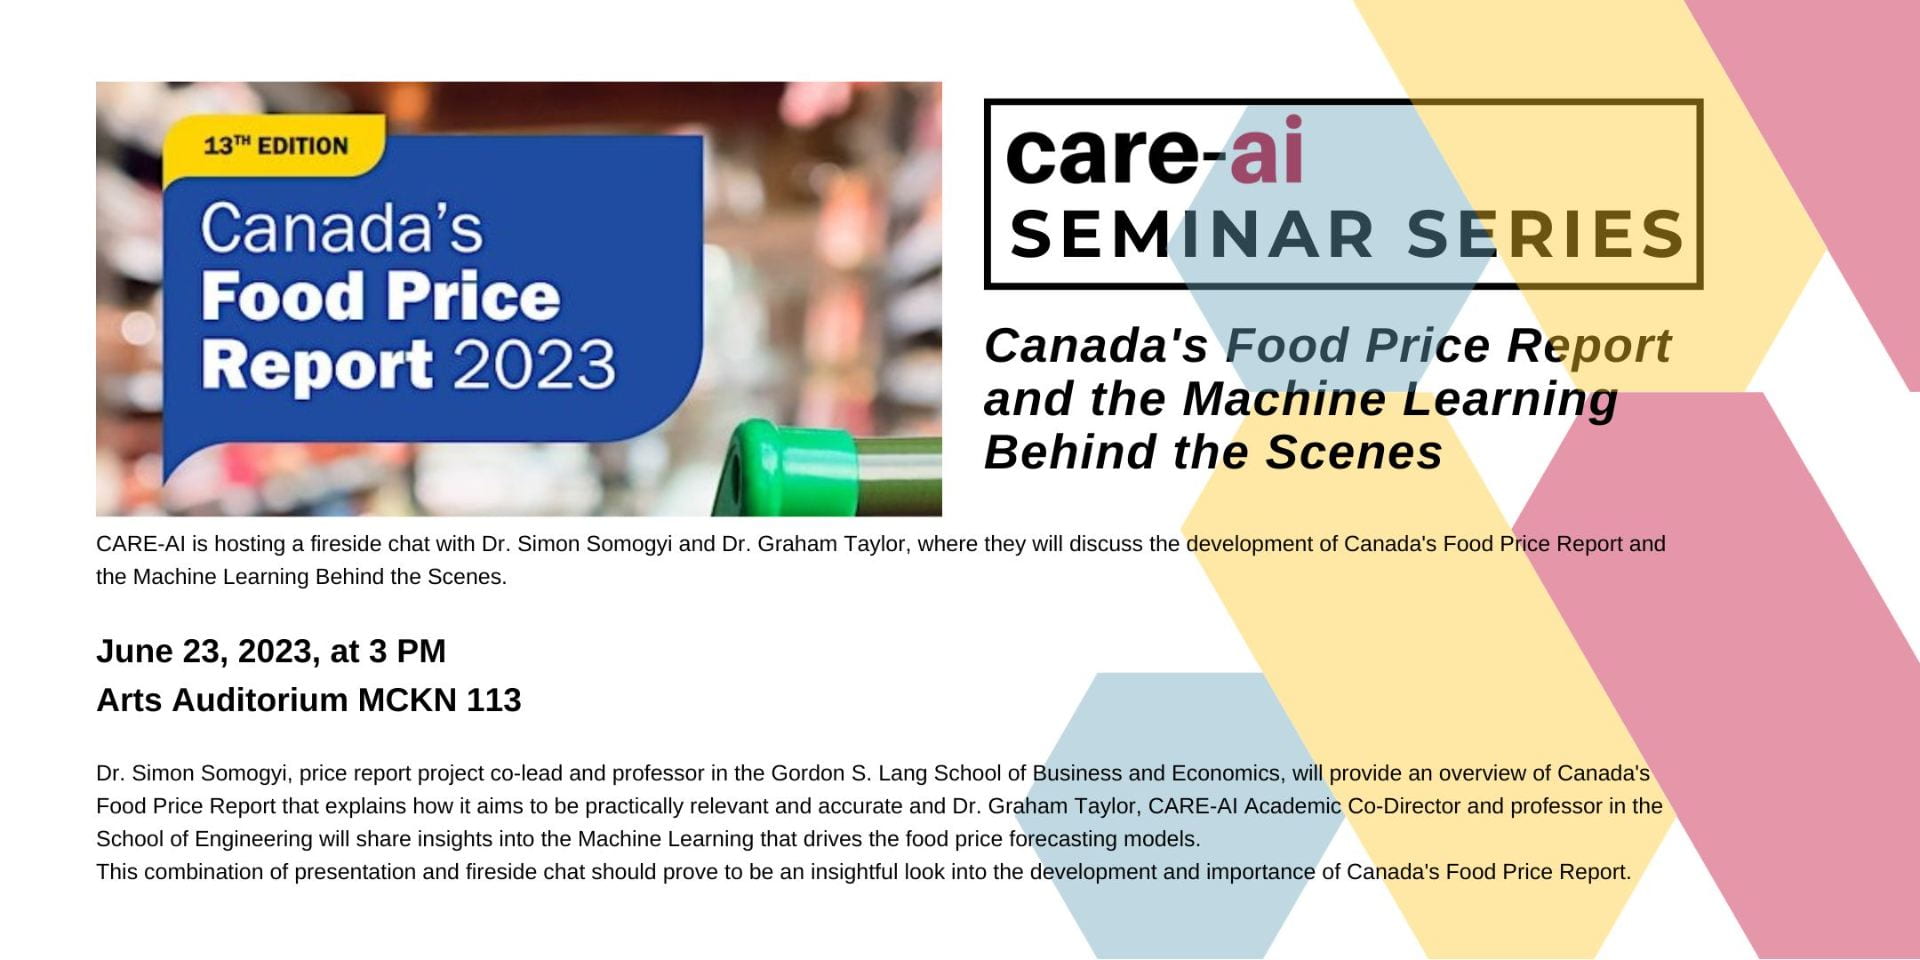 Poster for Canada's Food Price Report and the Machine Learning behind the scenes. CARE-AI is hosting a fireside chat with Dr. Simon Somogyi and Dr. Graham Taylor, where they will discuss the development of Canada's Food Price Report and the Machine Learning Behind the Scenes. </p>
<p>June 23, 2023, at 3 PM<br />
Arts Auditorium MCKN 113</p>
<p>Dr. Simon Somogyi, price report project co-lead and professor in the Gordon S. Lang School of Business and Economics, will provide an overview of Canada's Food Price Report that explains how it aims to be practically relevant and accurate and Dr. Graham Taylor, CARE-AI Academic Co-Director and professor in the School of Engineering will share insights into the Machine Learning that drives the food price forecasting models.<br />
This combination of presentation and fireside chat should prove to be an insightful look into the development and importance of Canada's Food Price Report.